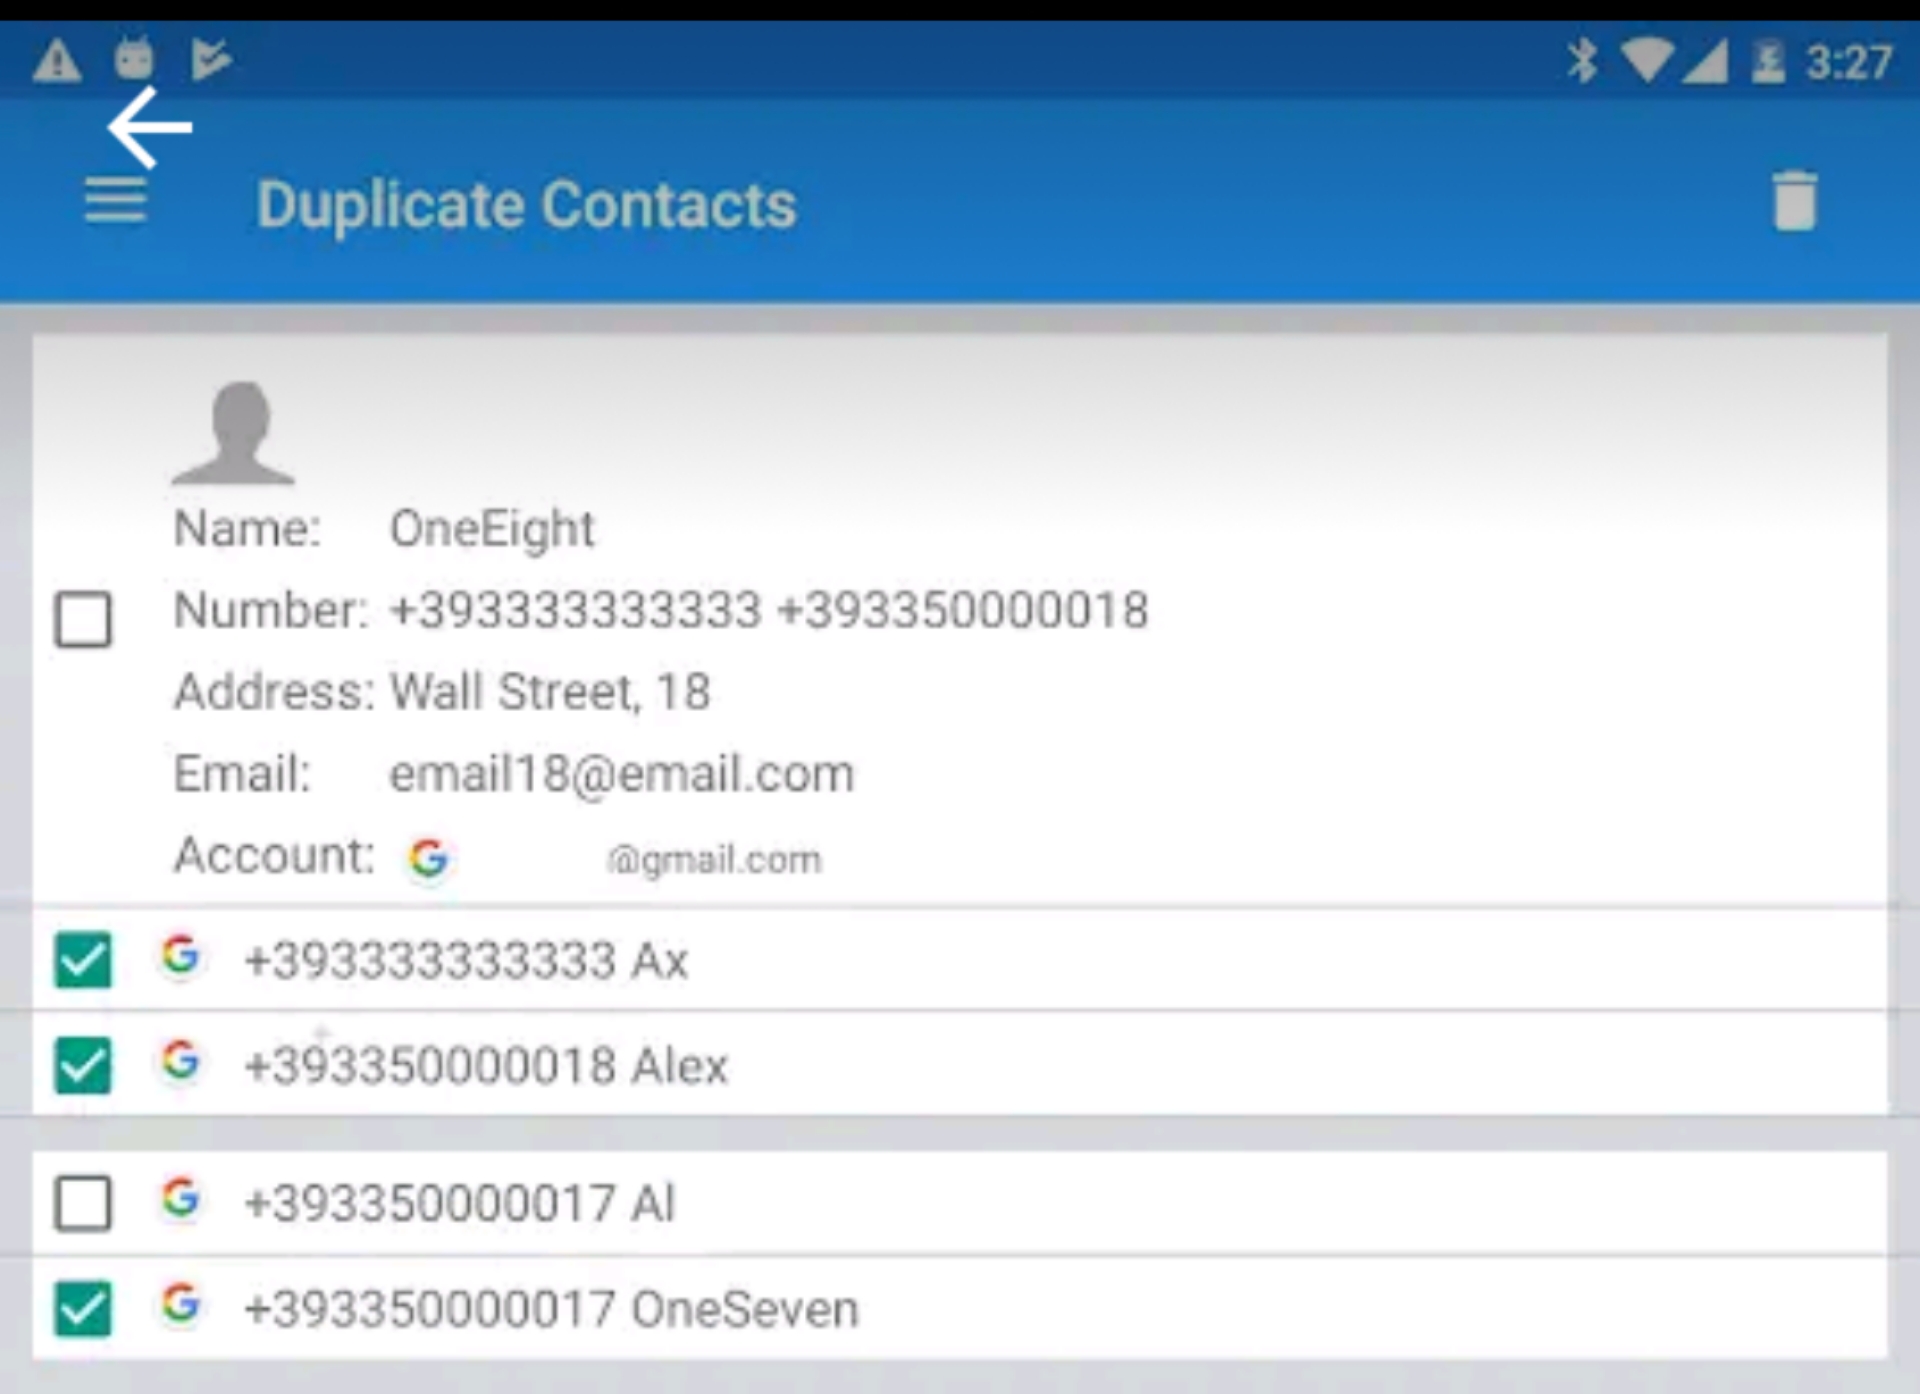 Duplicate Contacts　一括削除機能　便利